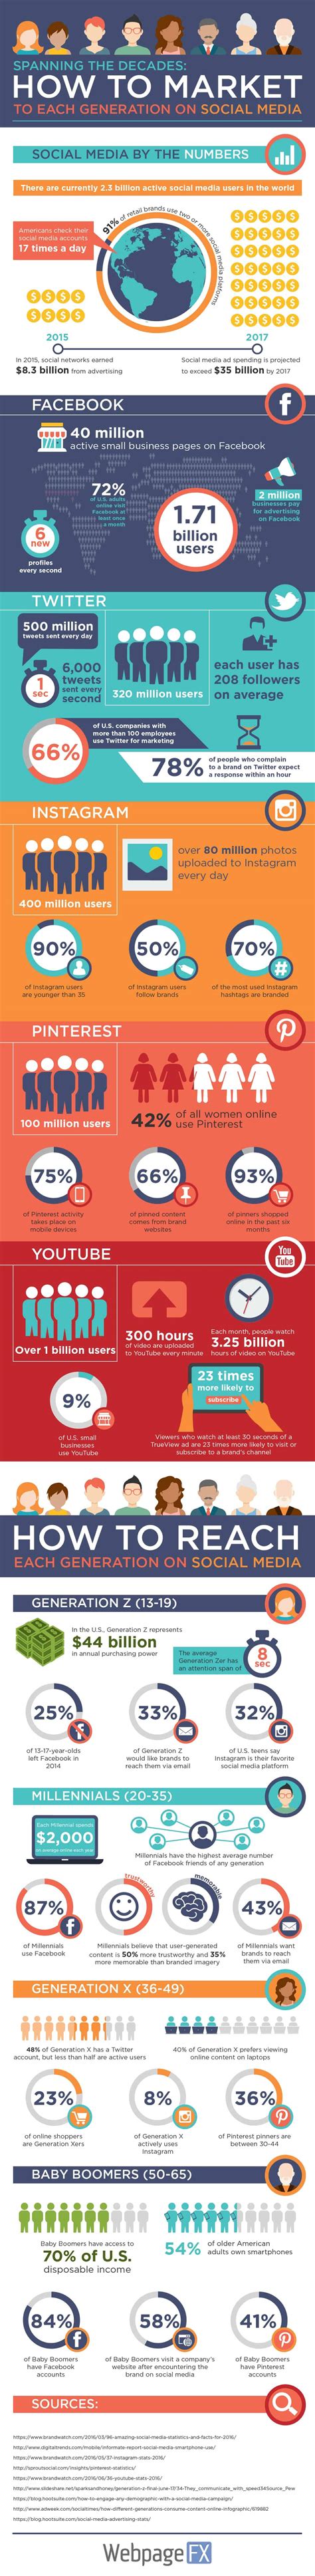 social media infographic examples jssery